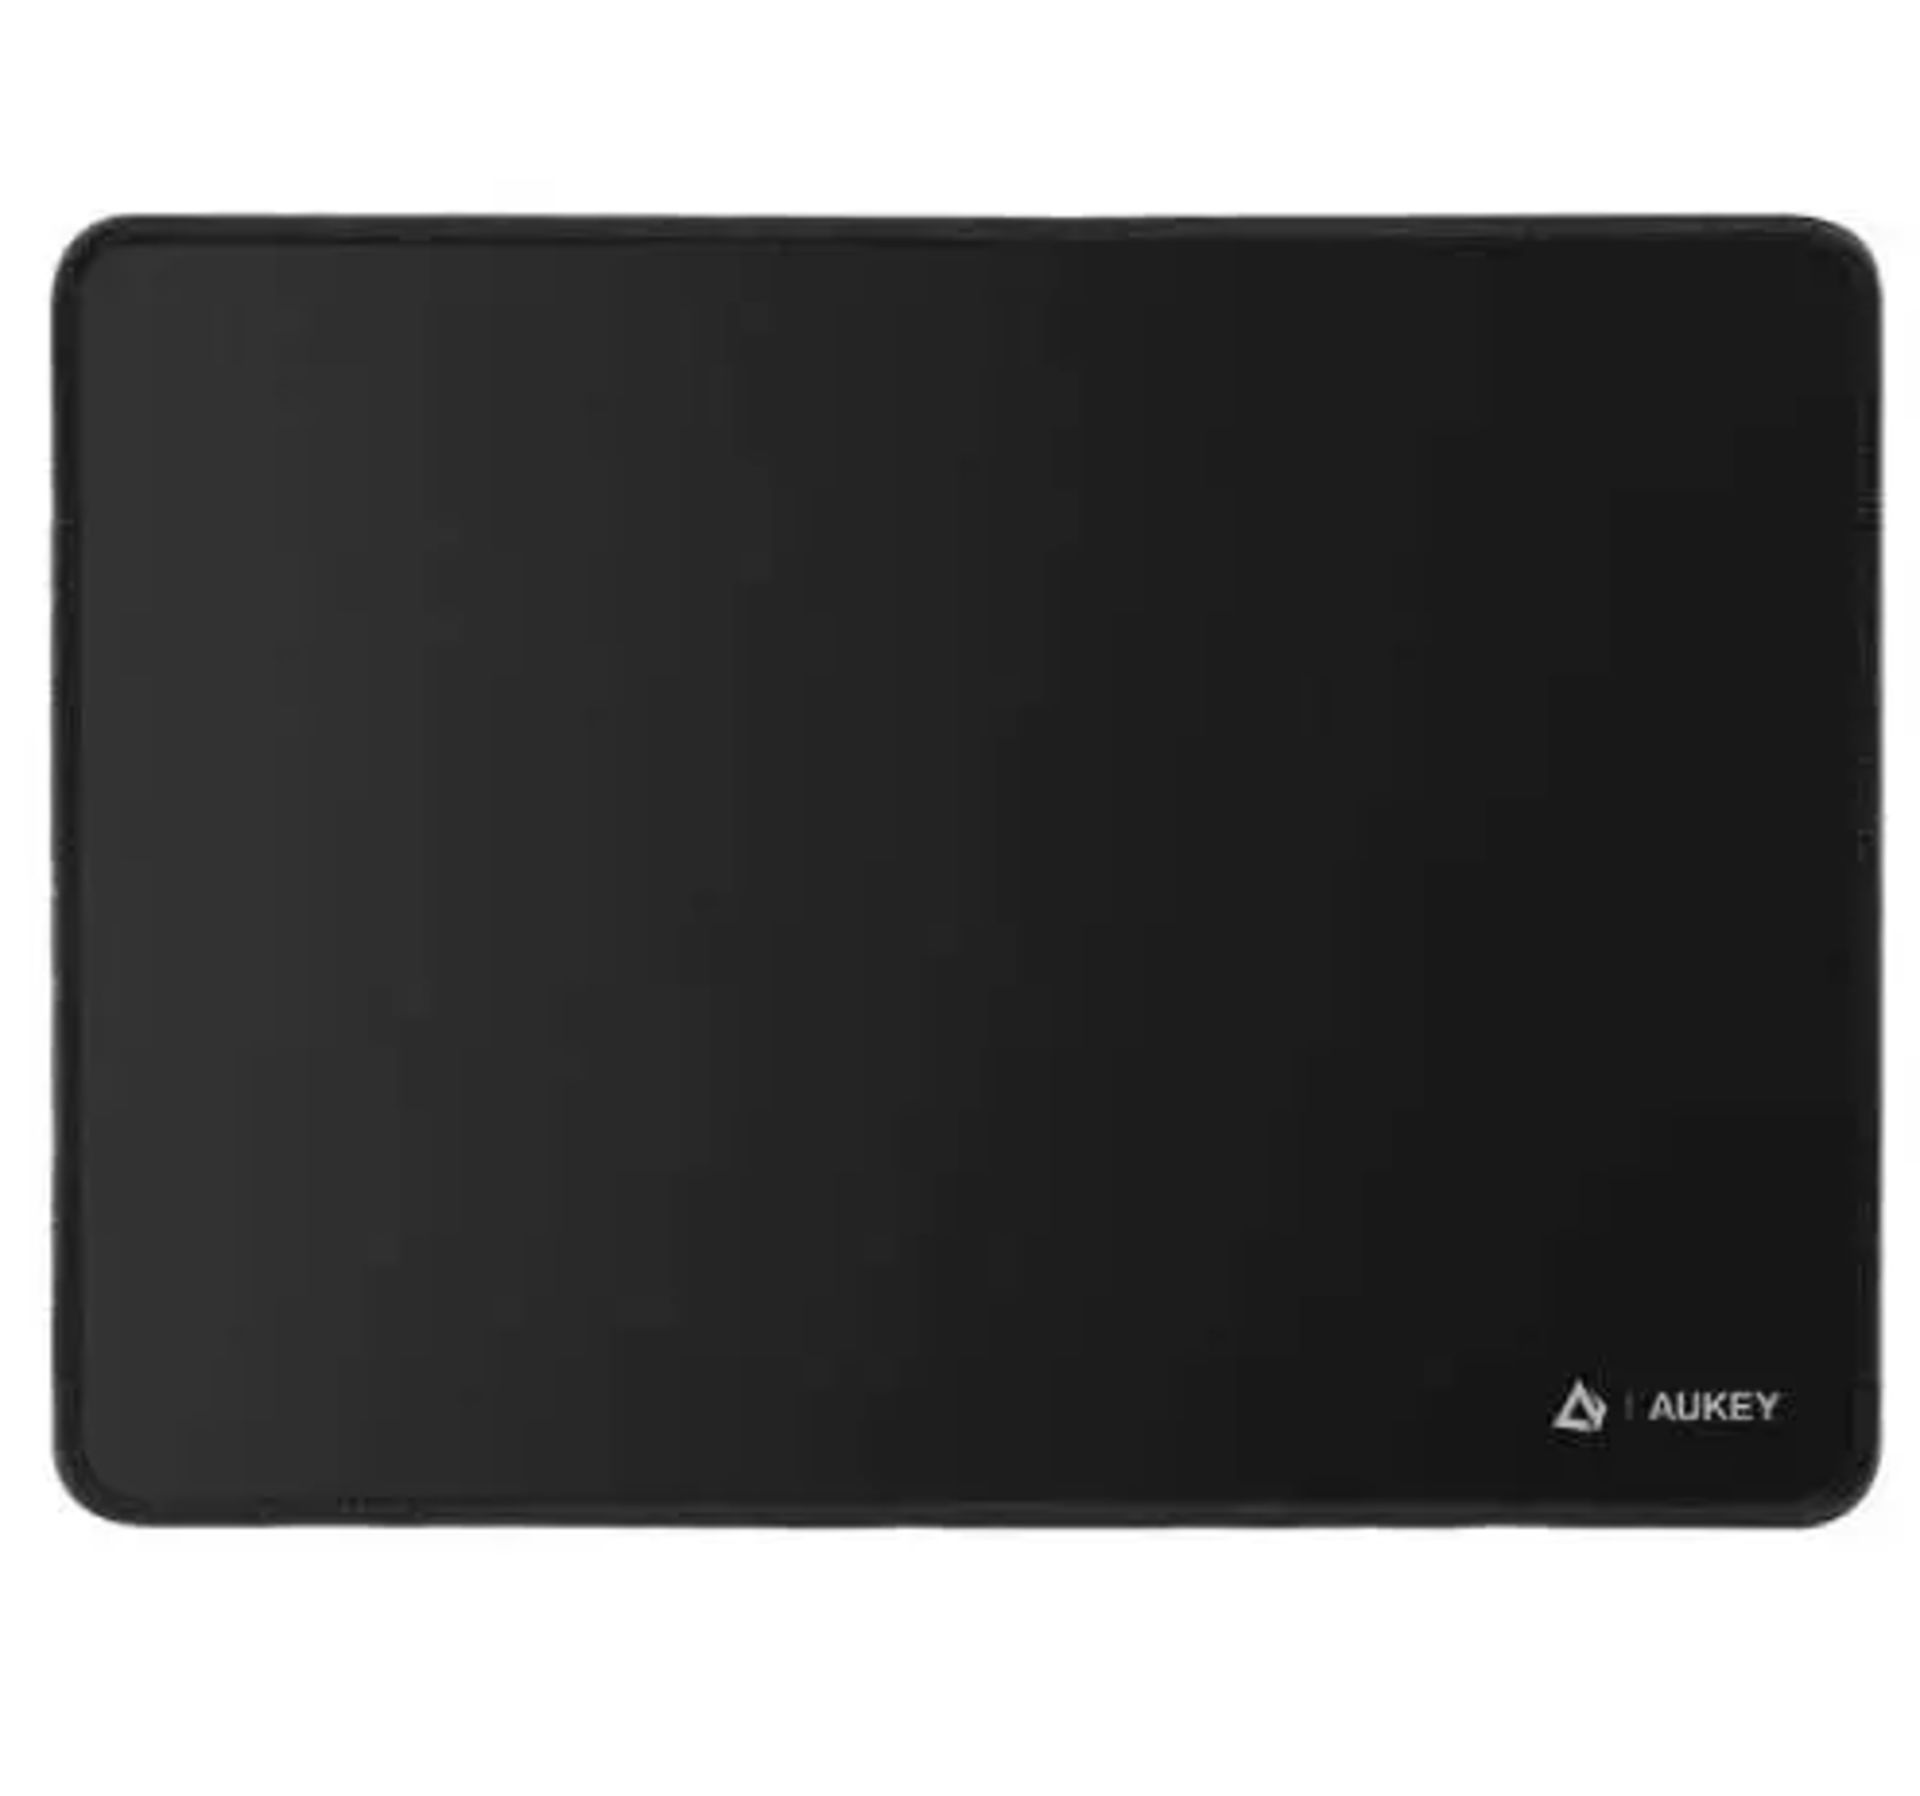 AUKEY KM-P1 MOUSE PAD FOR OFFICE HOME 13.7 X 9.8 IN BLACK 5000 PCS - Image 2 of 3